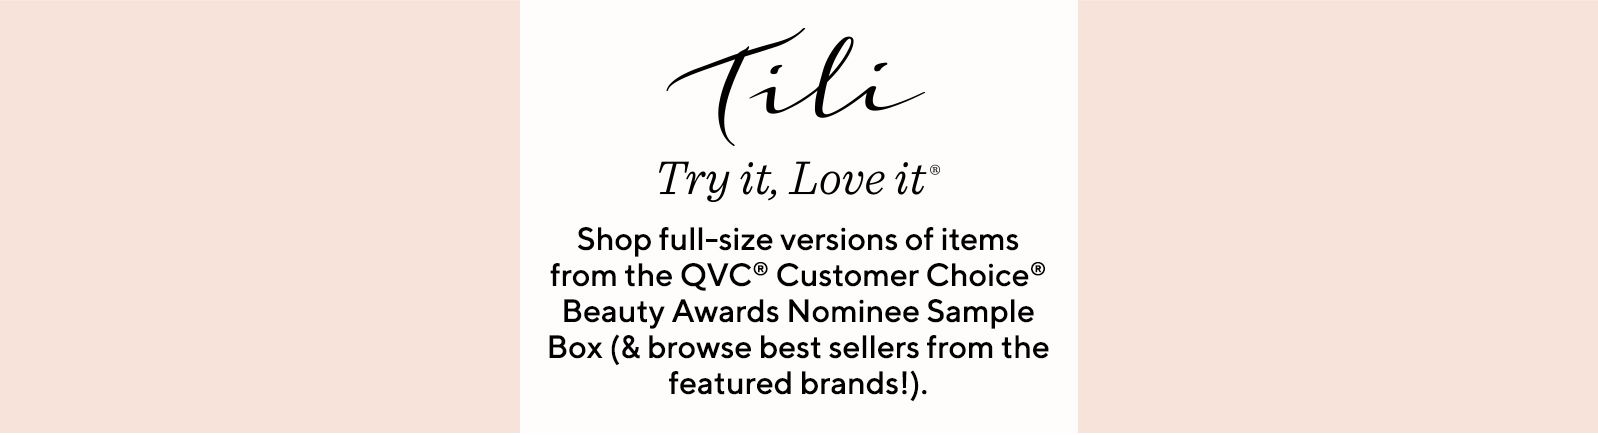 TILI Try it, Love it® - Shop full-size versions of items from the QVC® Customer Choice® Beauty Awards Nominee Sample Box (& browse best sellers from the featured brands!).